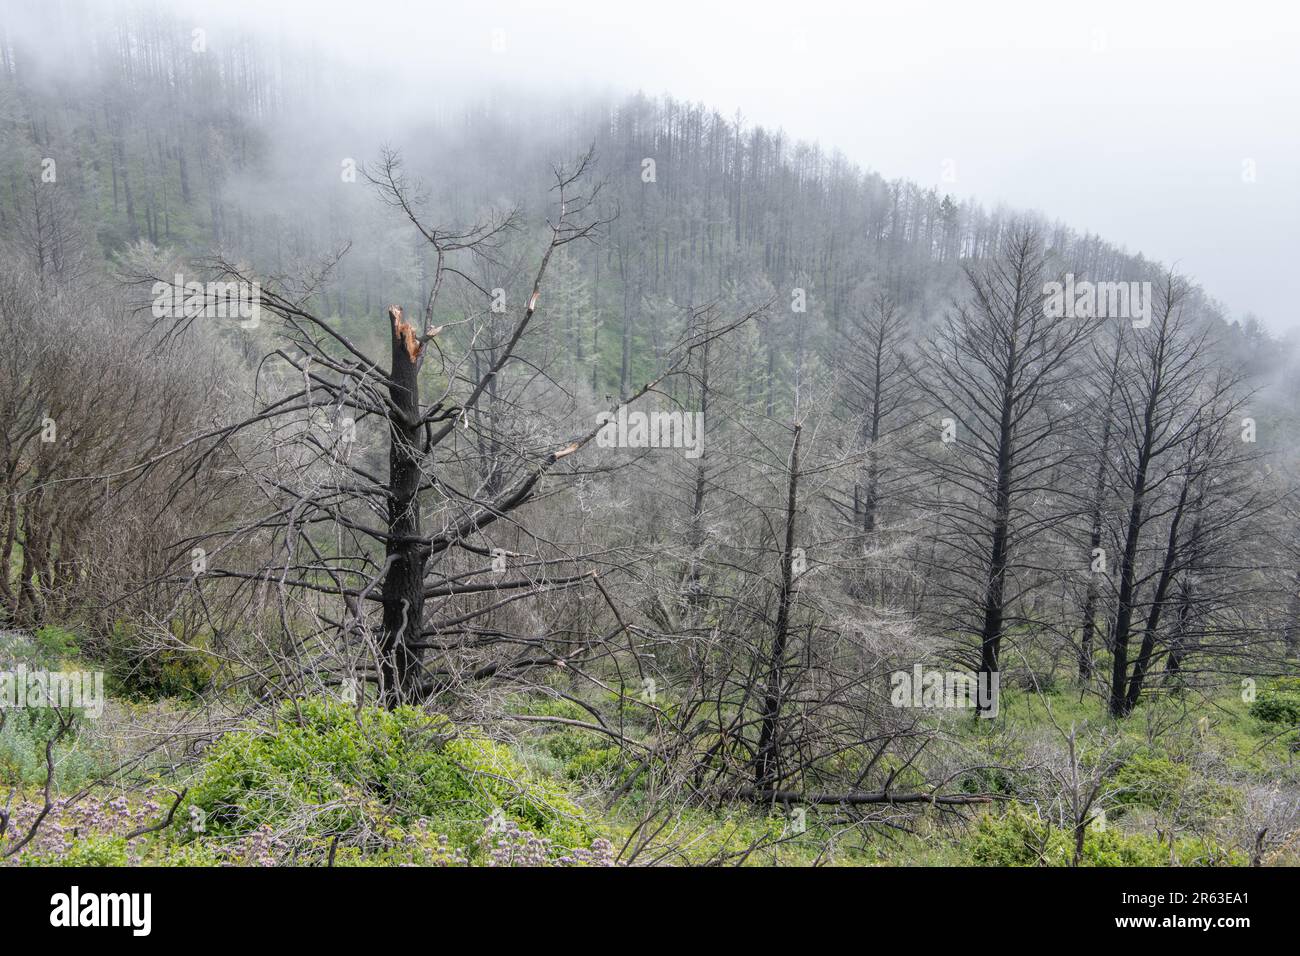 After the Woodward forest fire in California, many charred trees remain but the environment begins to heal as the understory grows. Stock Photo